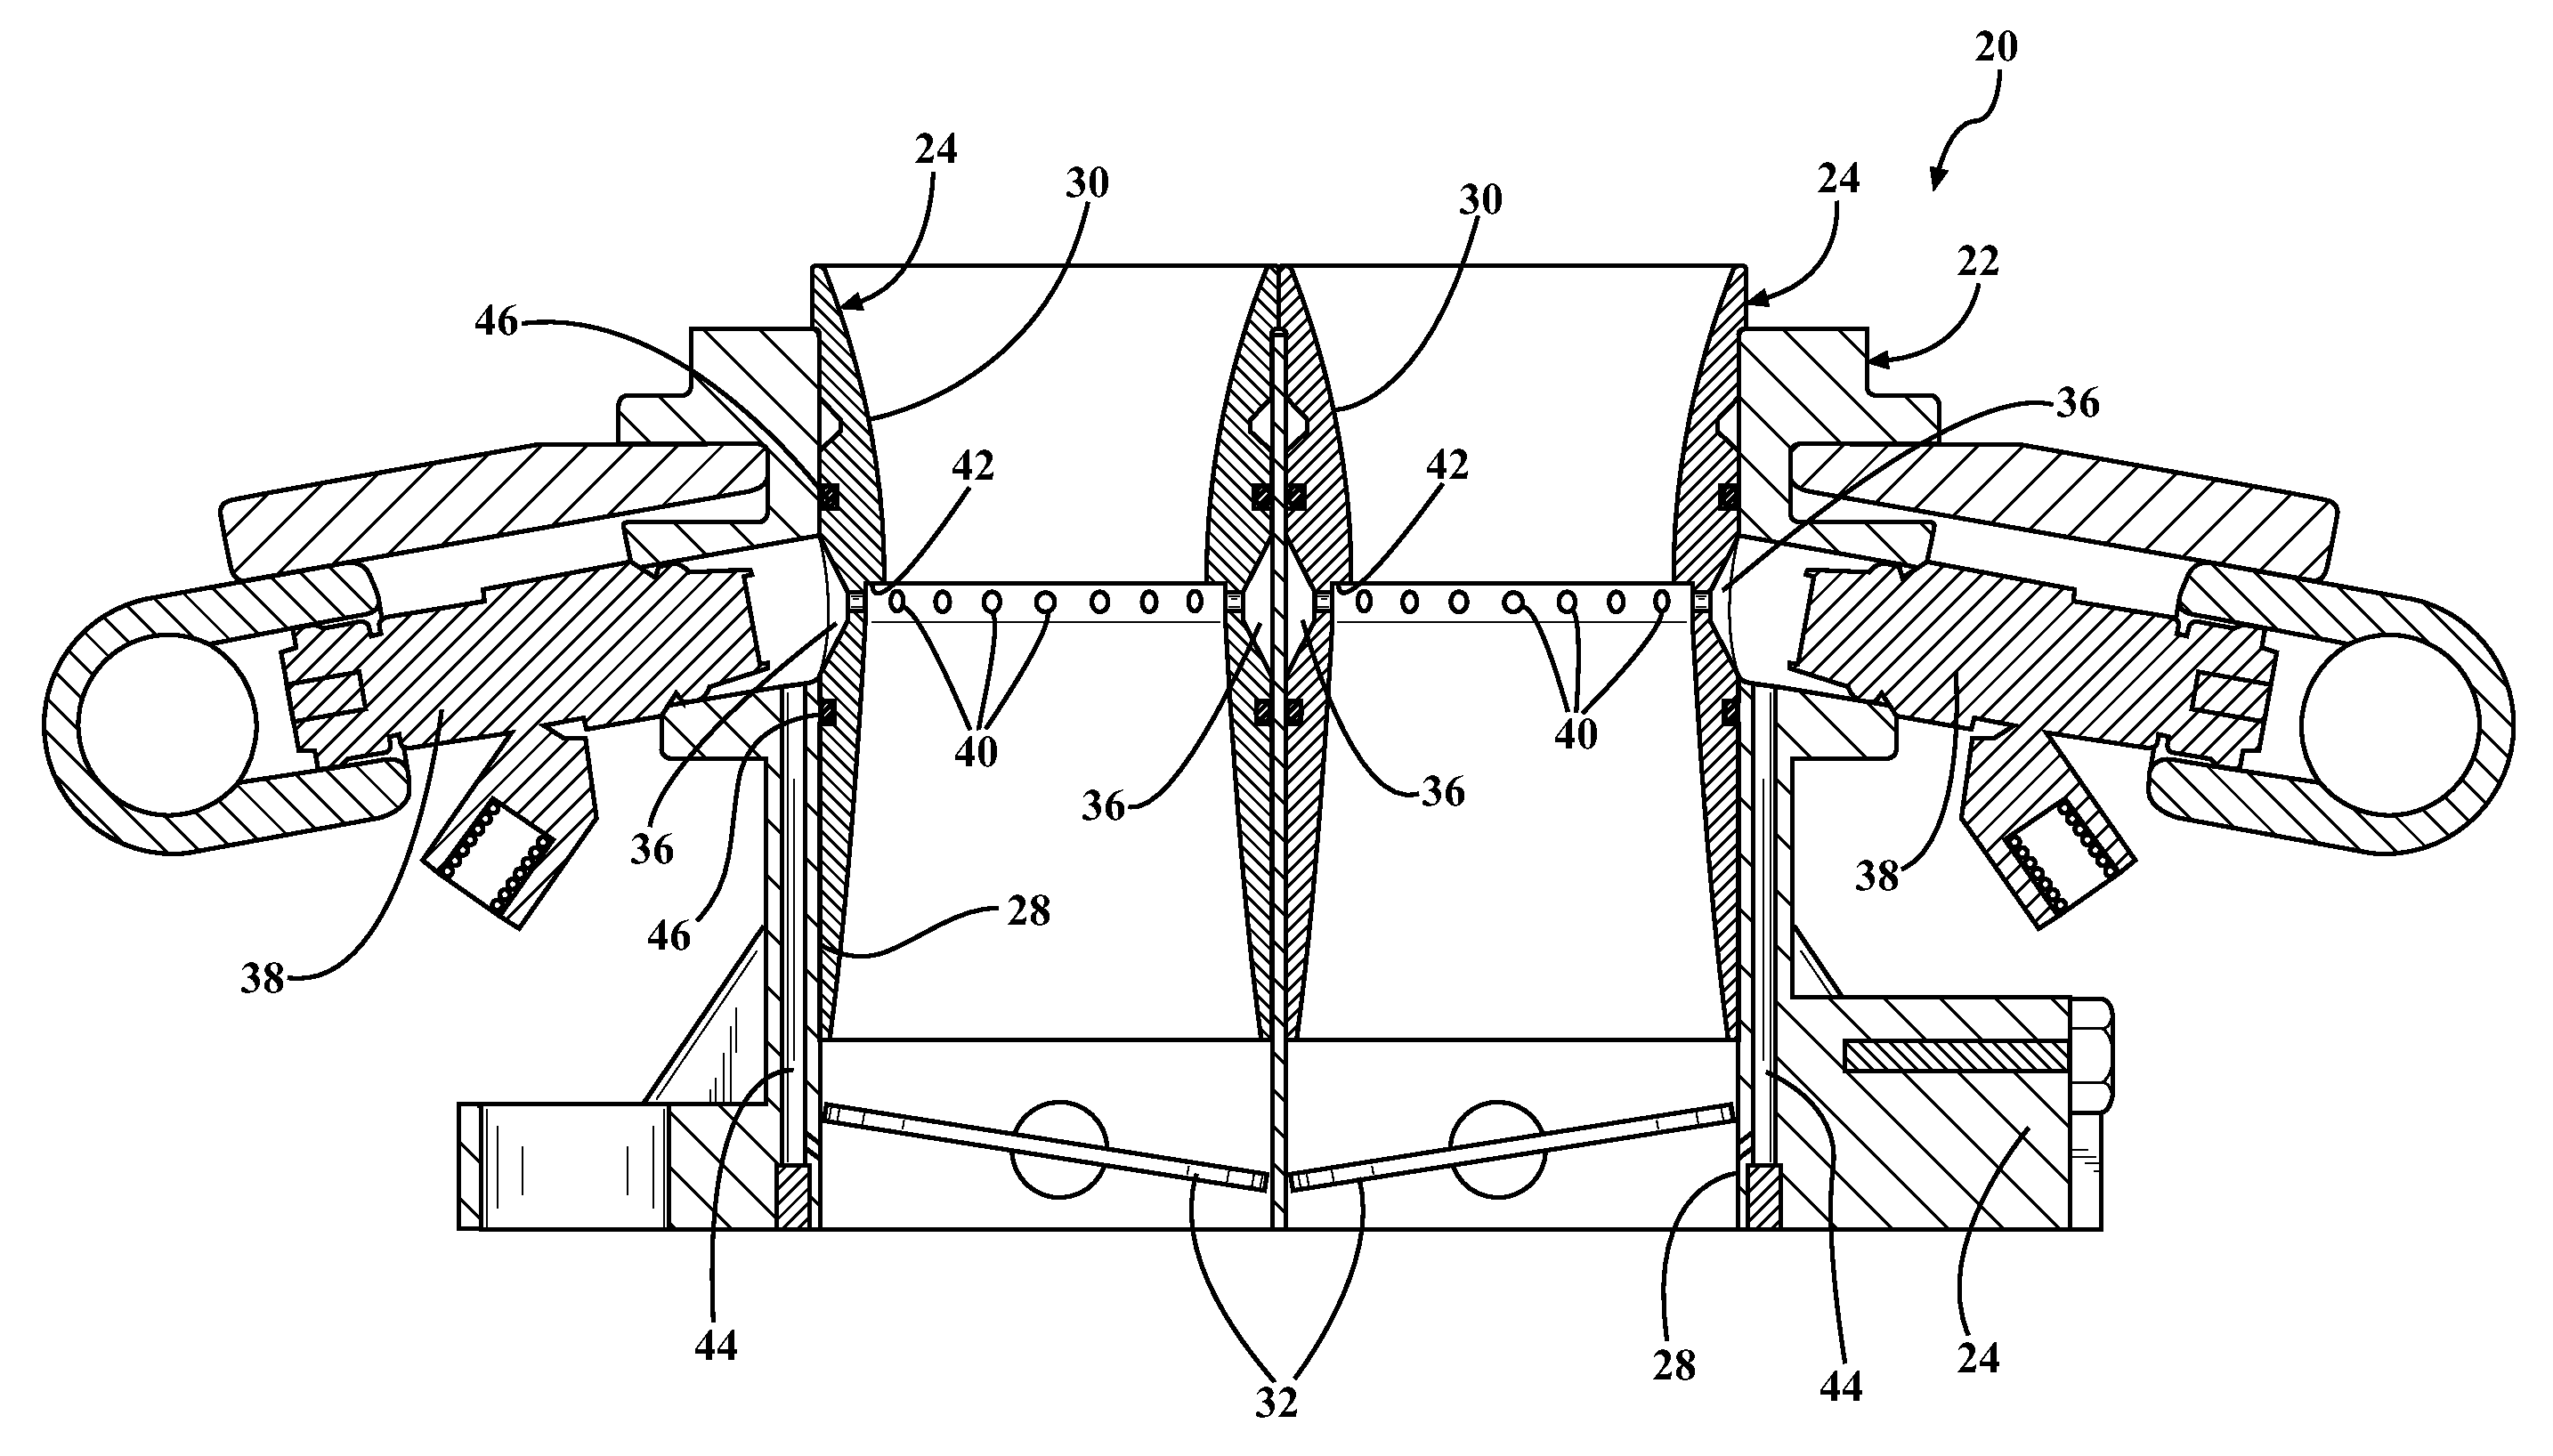 Hybrid carburetor and fuel injection assembly for an internal combustion engine